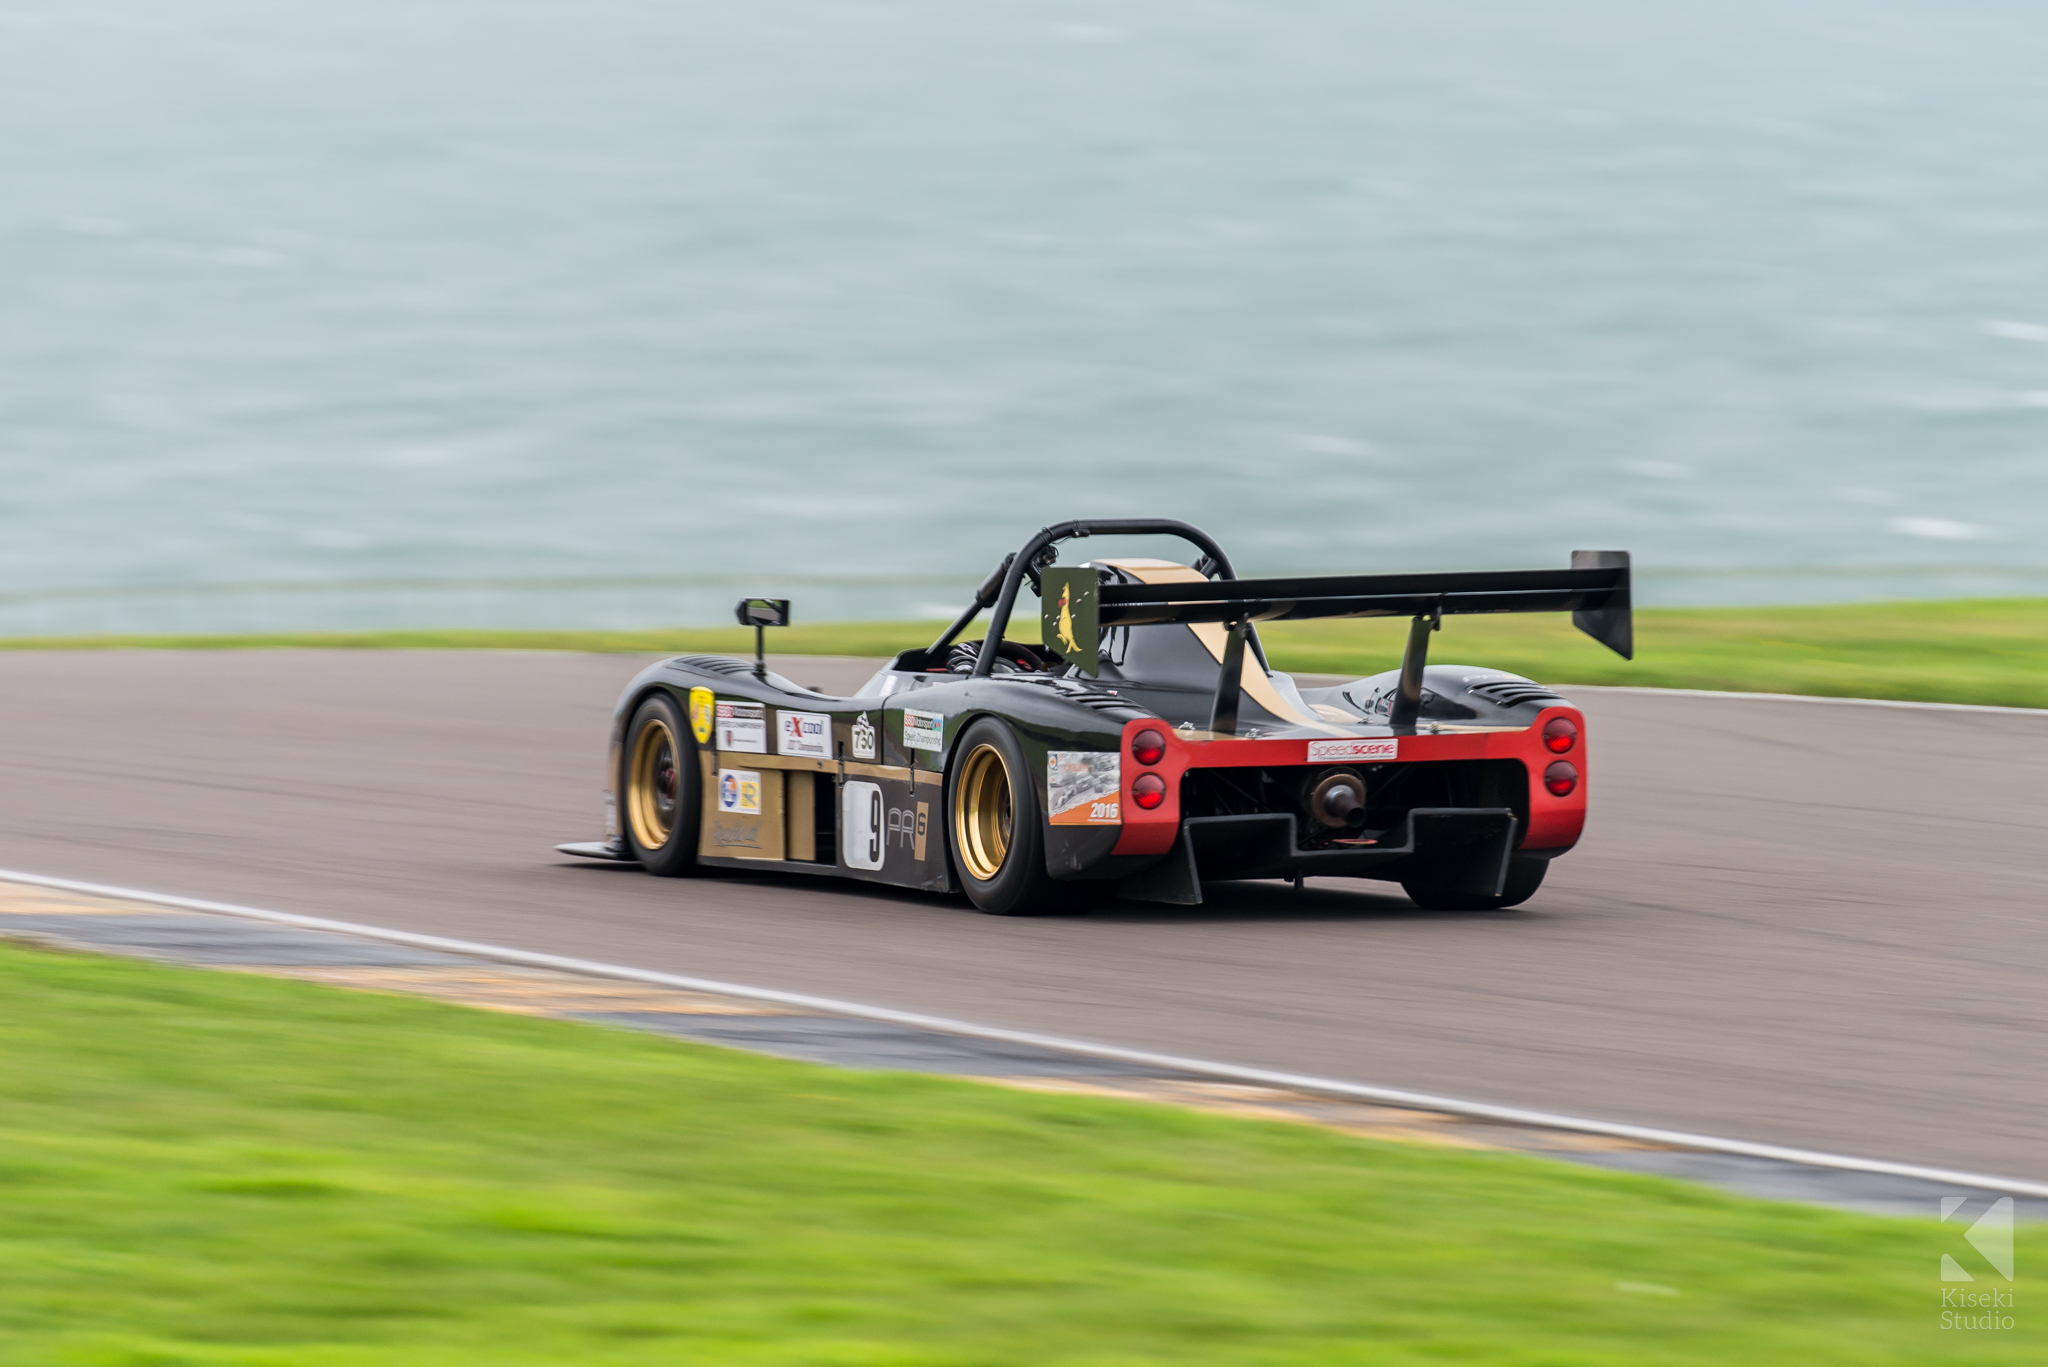 anglesey-sprint-october-radical-kit-car-side-panning-speed-fast-sea-view-wales-hillclimb.jpg